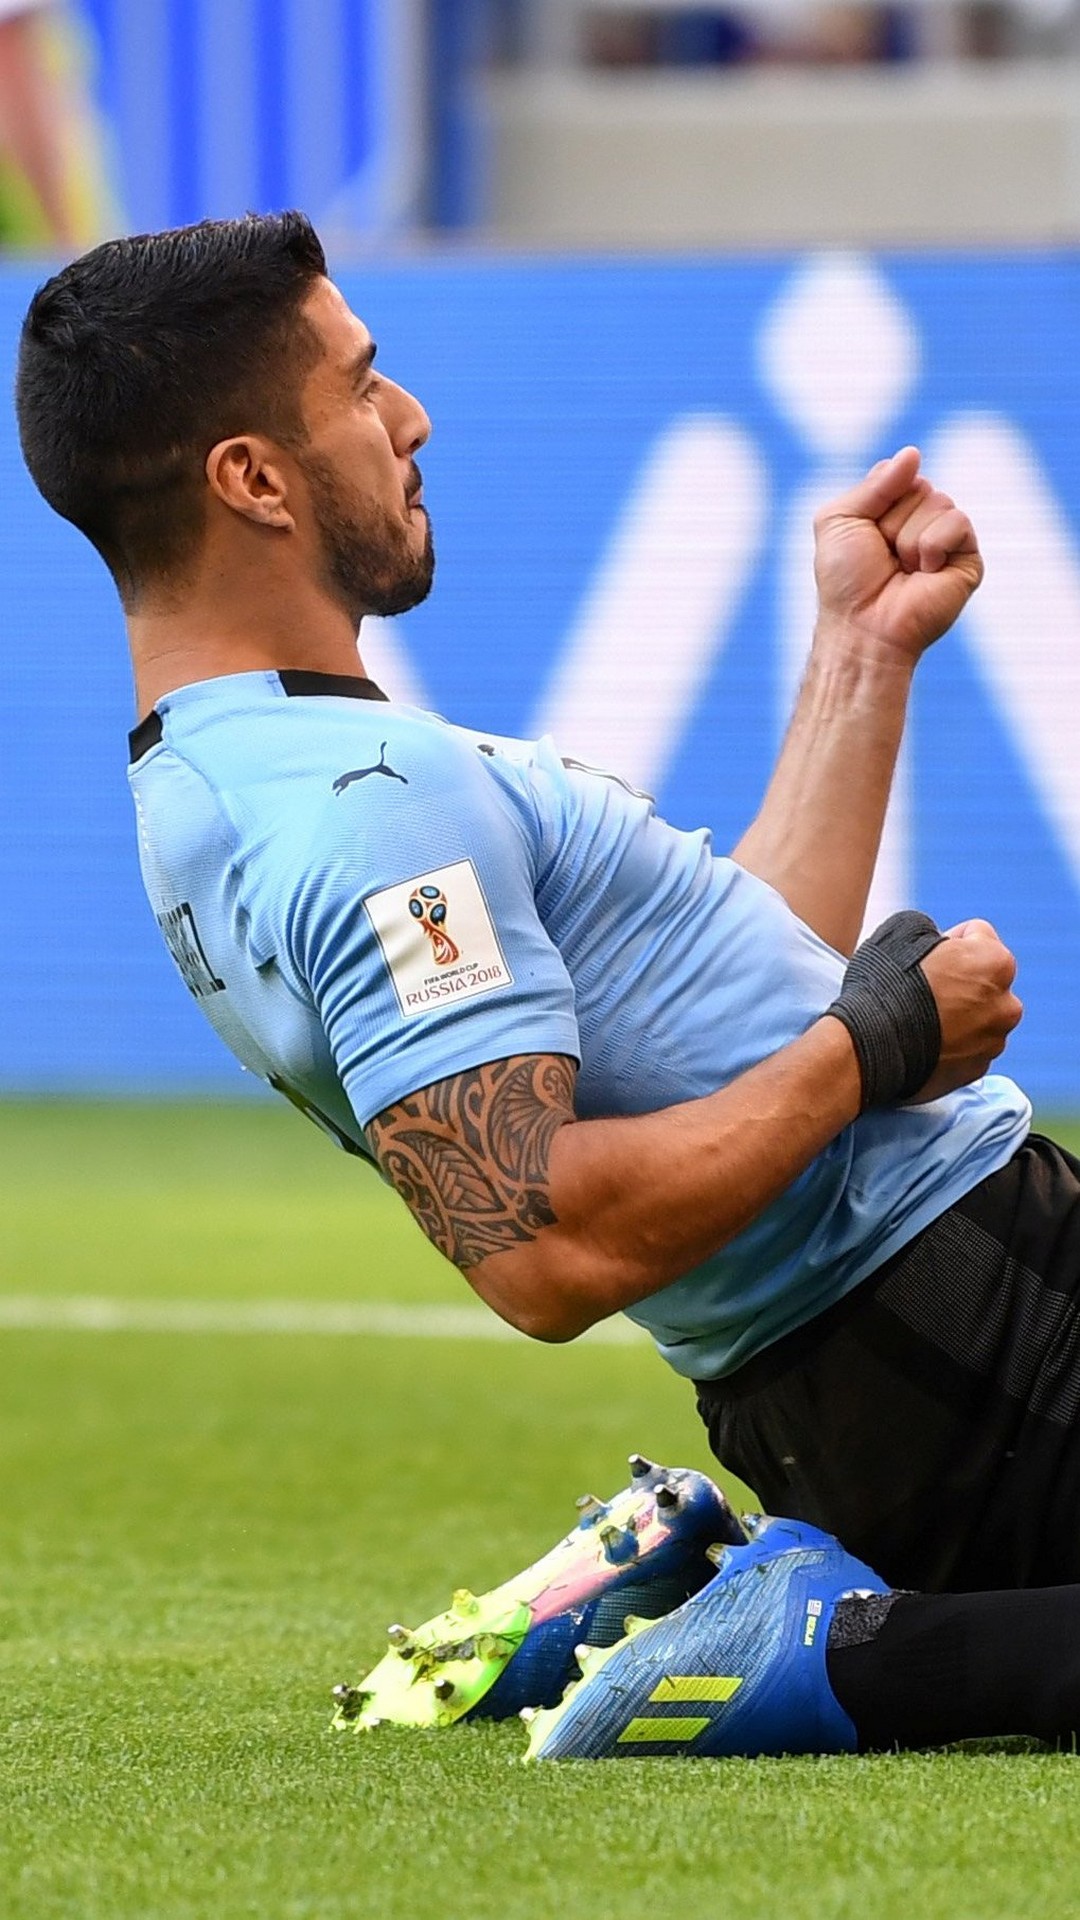 Wallpaper Luis Suarez Uruguay Android with resolution 1080X1920 pixel. You can make this wallpaper for your Android backgrounds, Tablet, Smartphones Screensavers and Mobile Phone Lock Screen